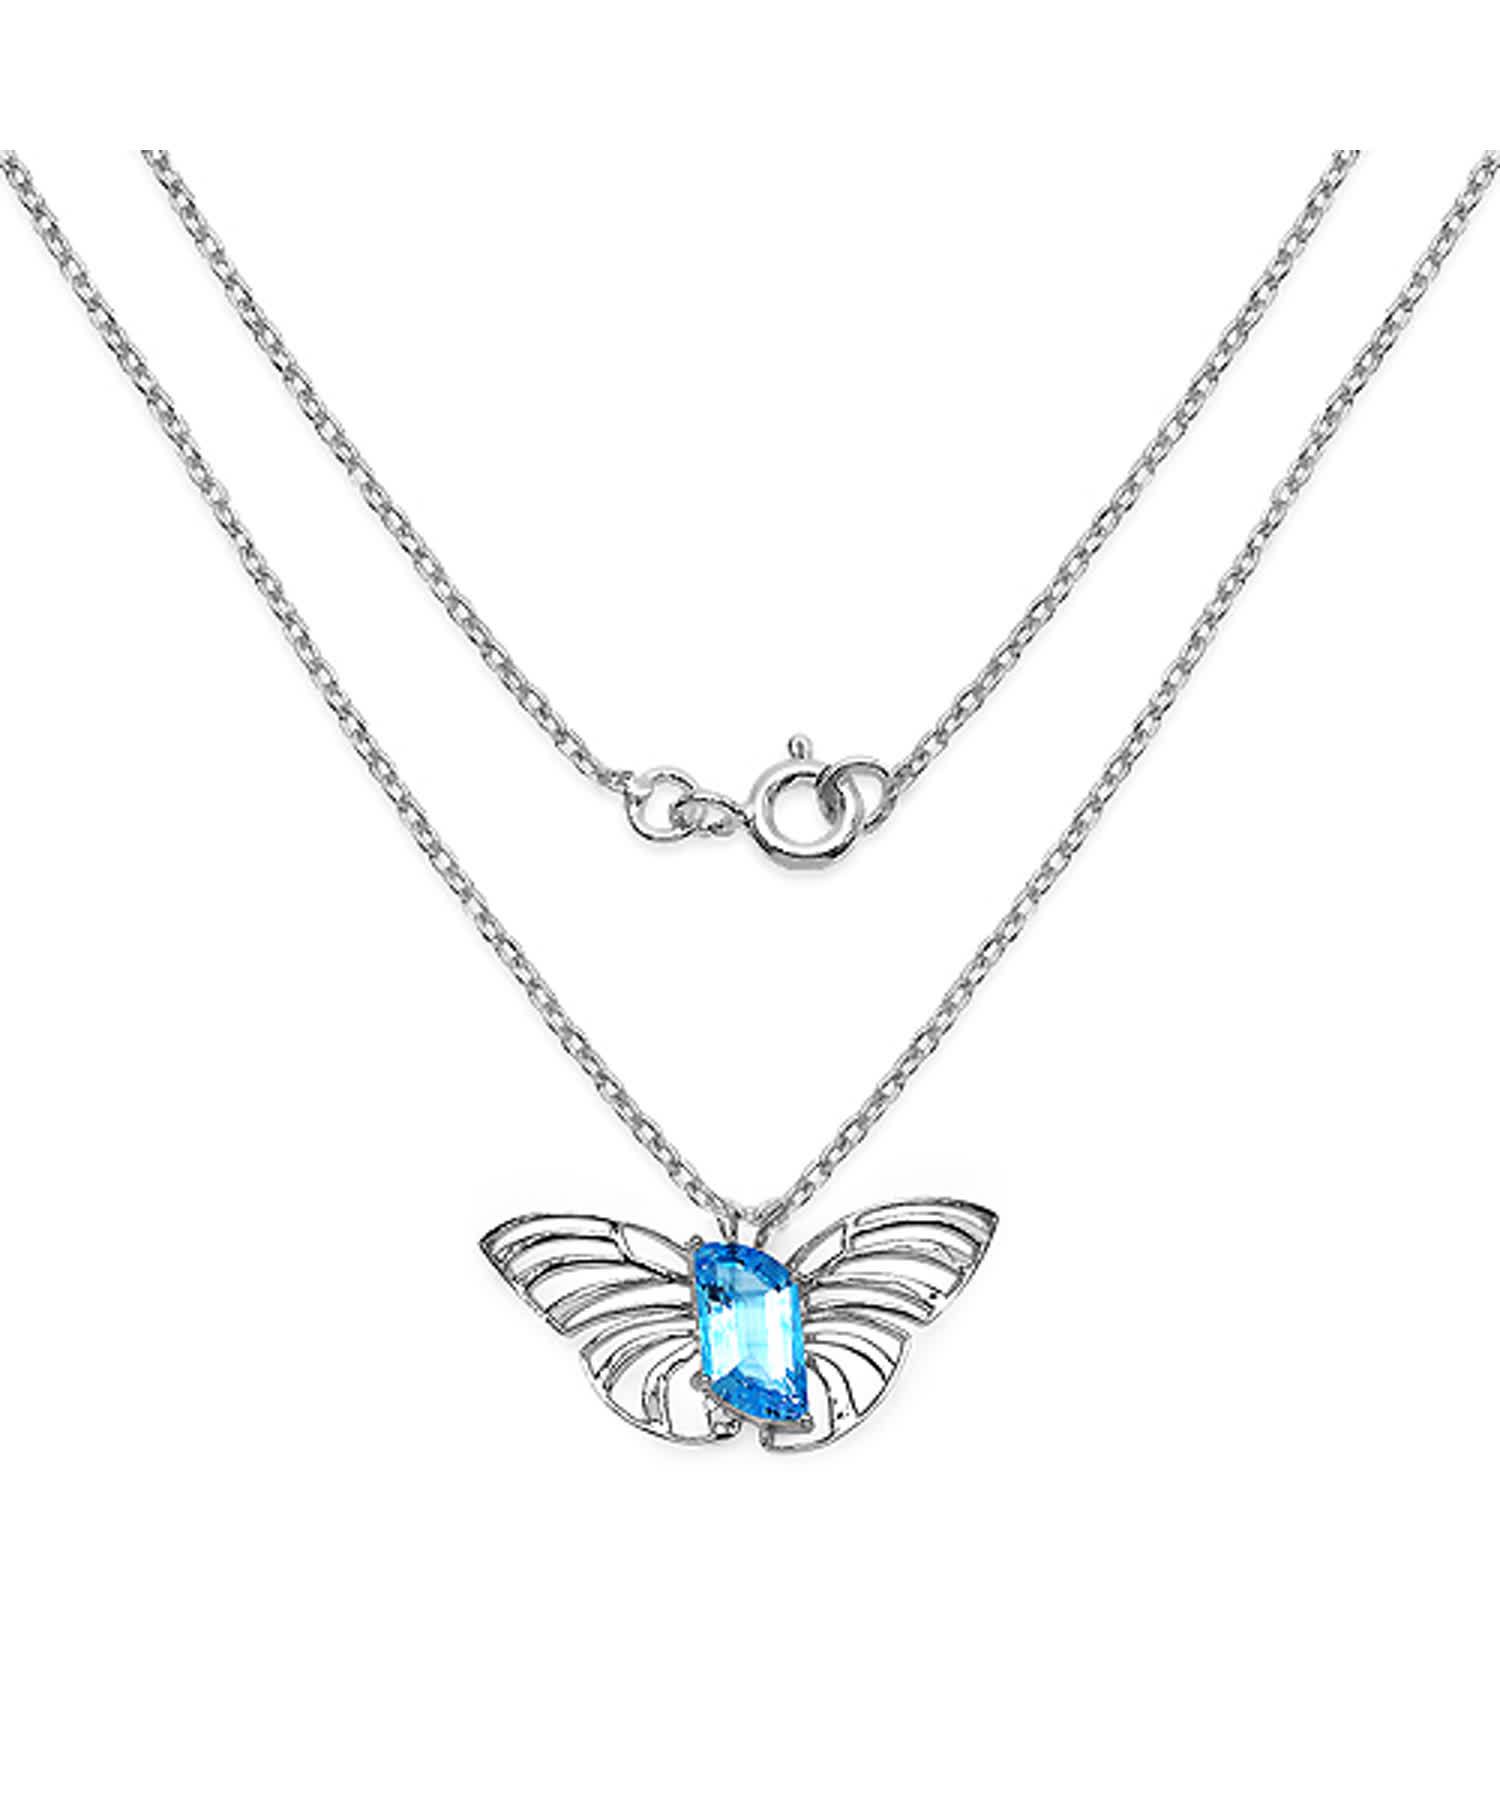 10.62ctw Natural Swiss Blue Topaz Rhodium Plated 925 Sterling Silver Butterfly Pendant With Chain View 2